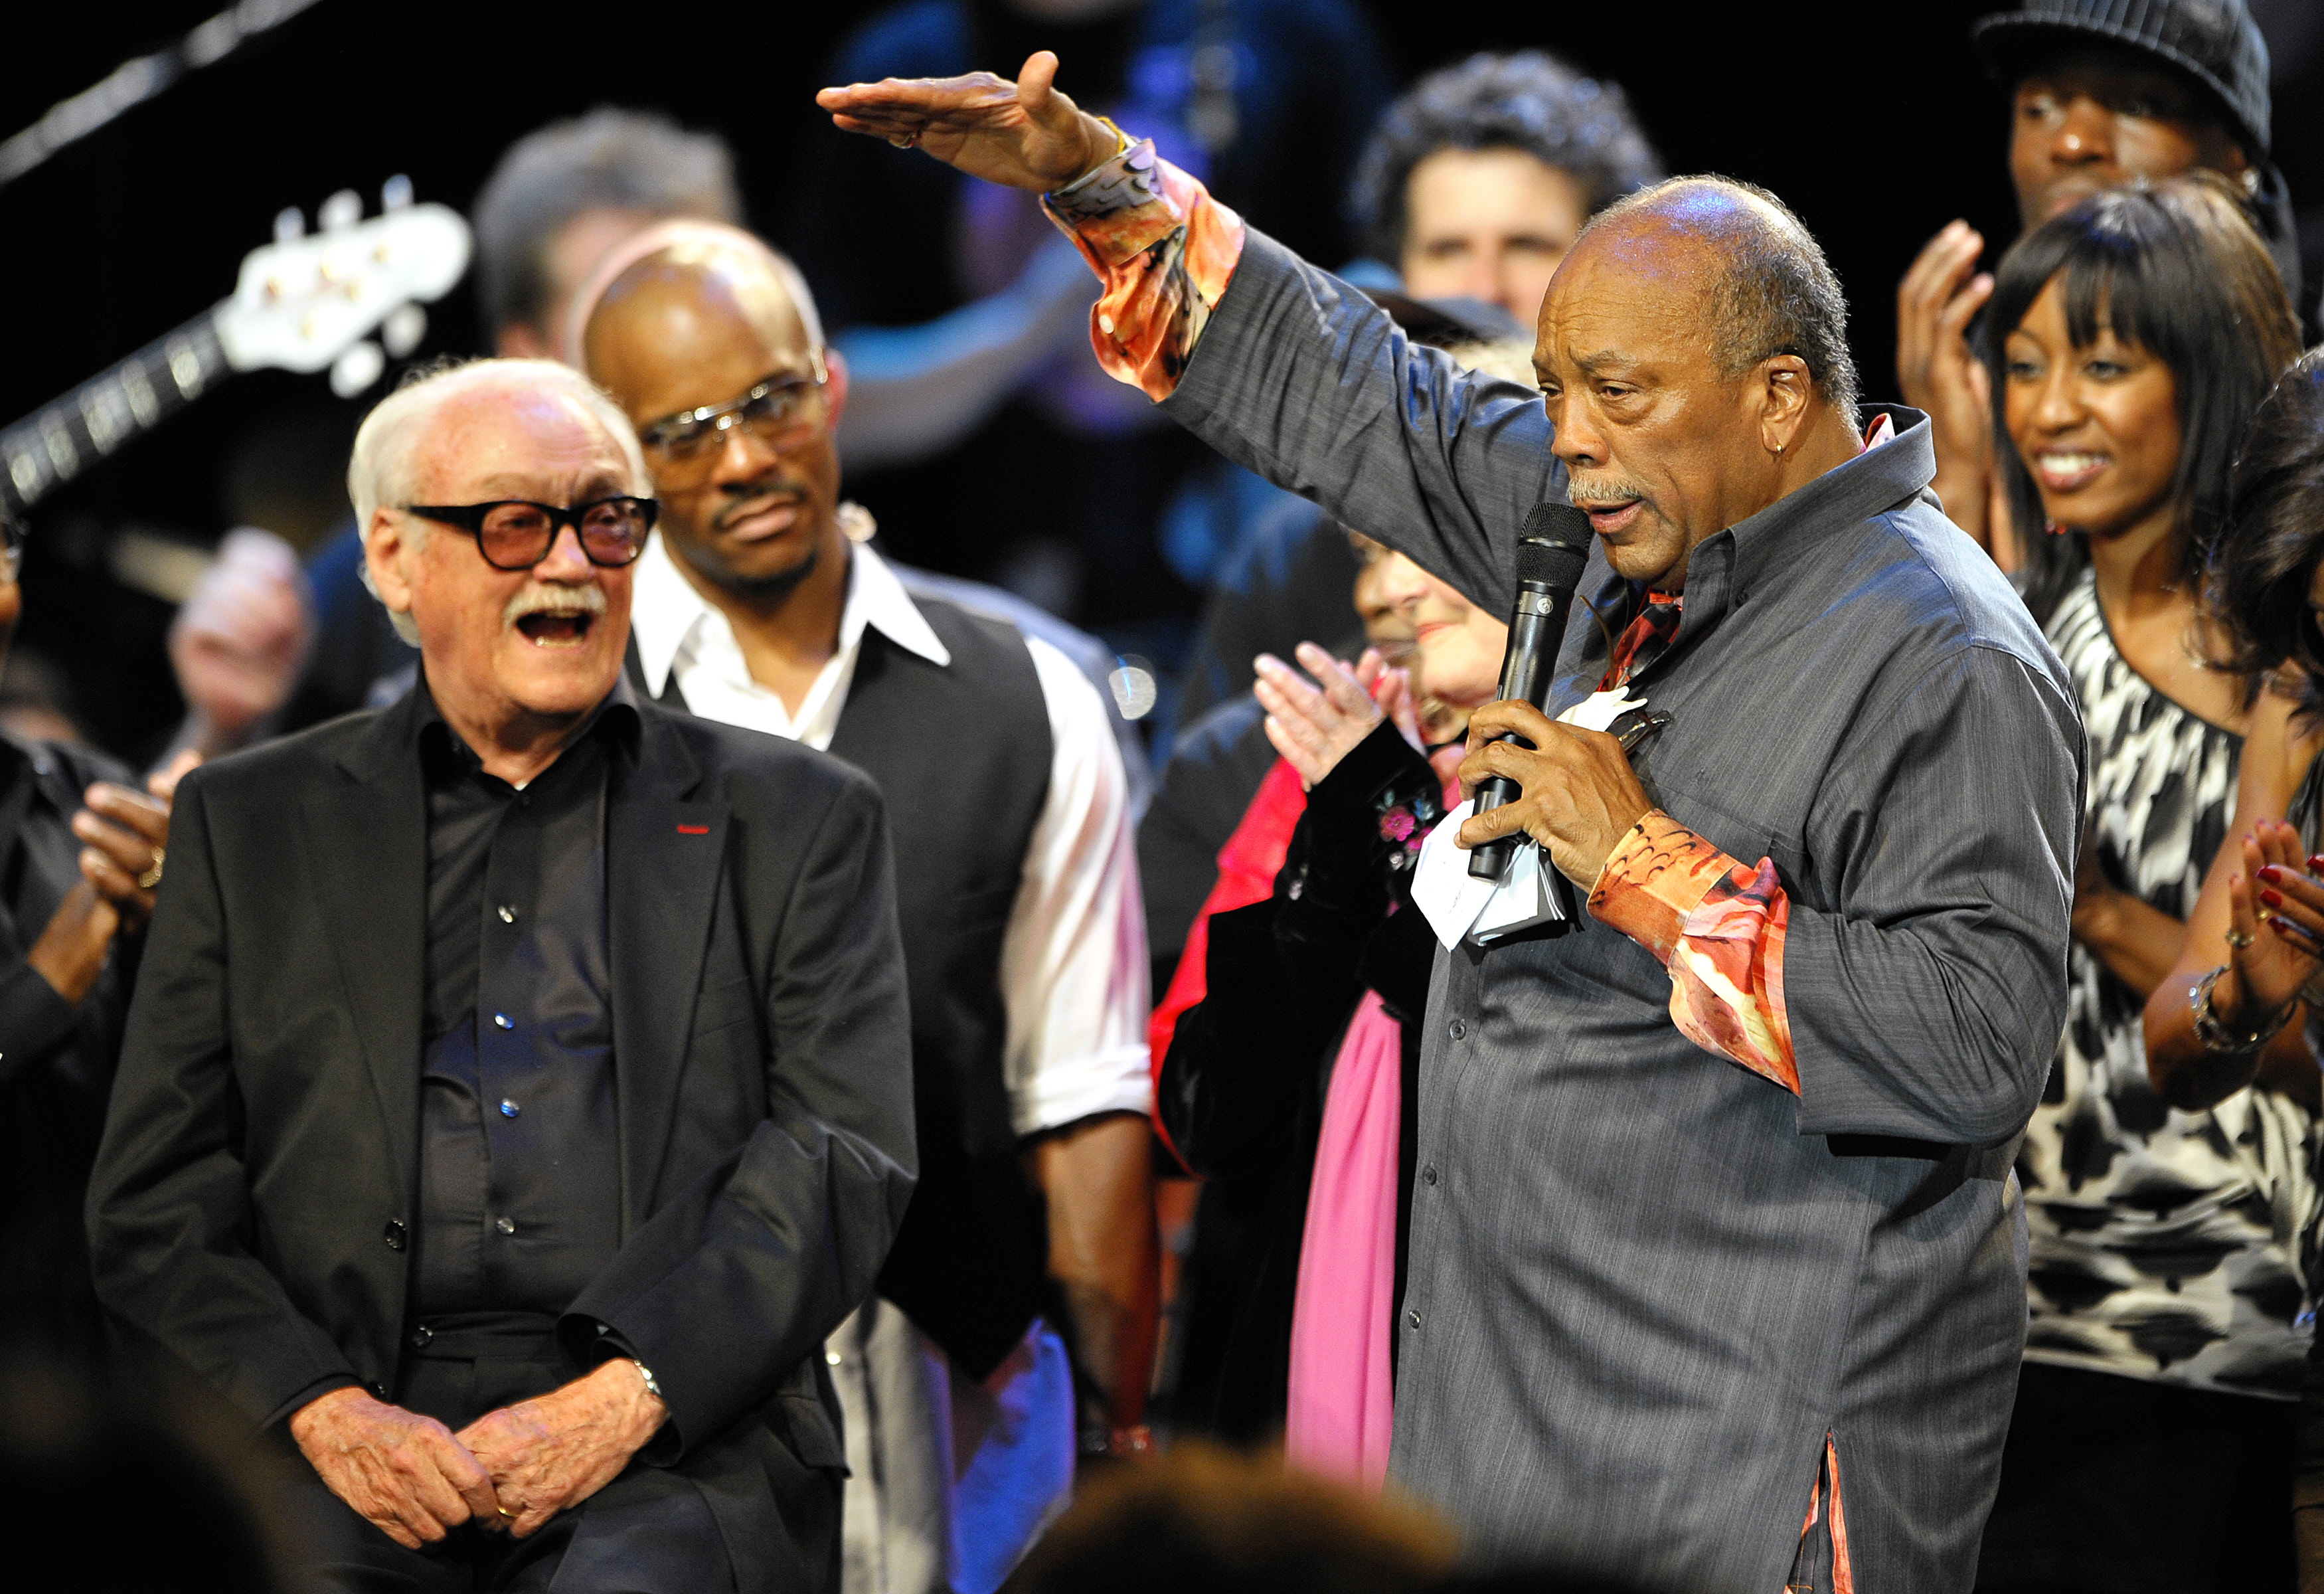 US music producer Quincy Jones (R) gestures with jazz harmonica player Toots Thielemans at the 42nd Montreux Jazz Festival. (FABRICE COFFRINI/AFP/Getty Images)